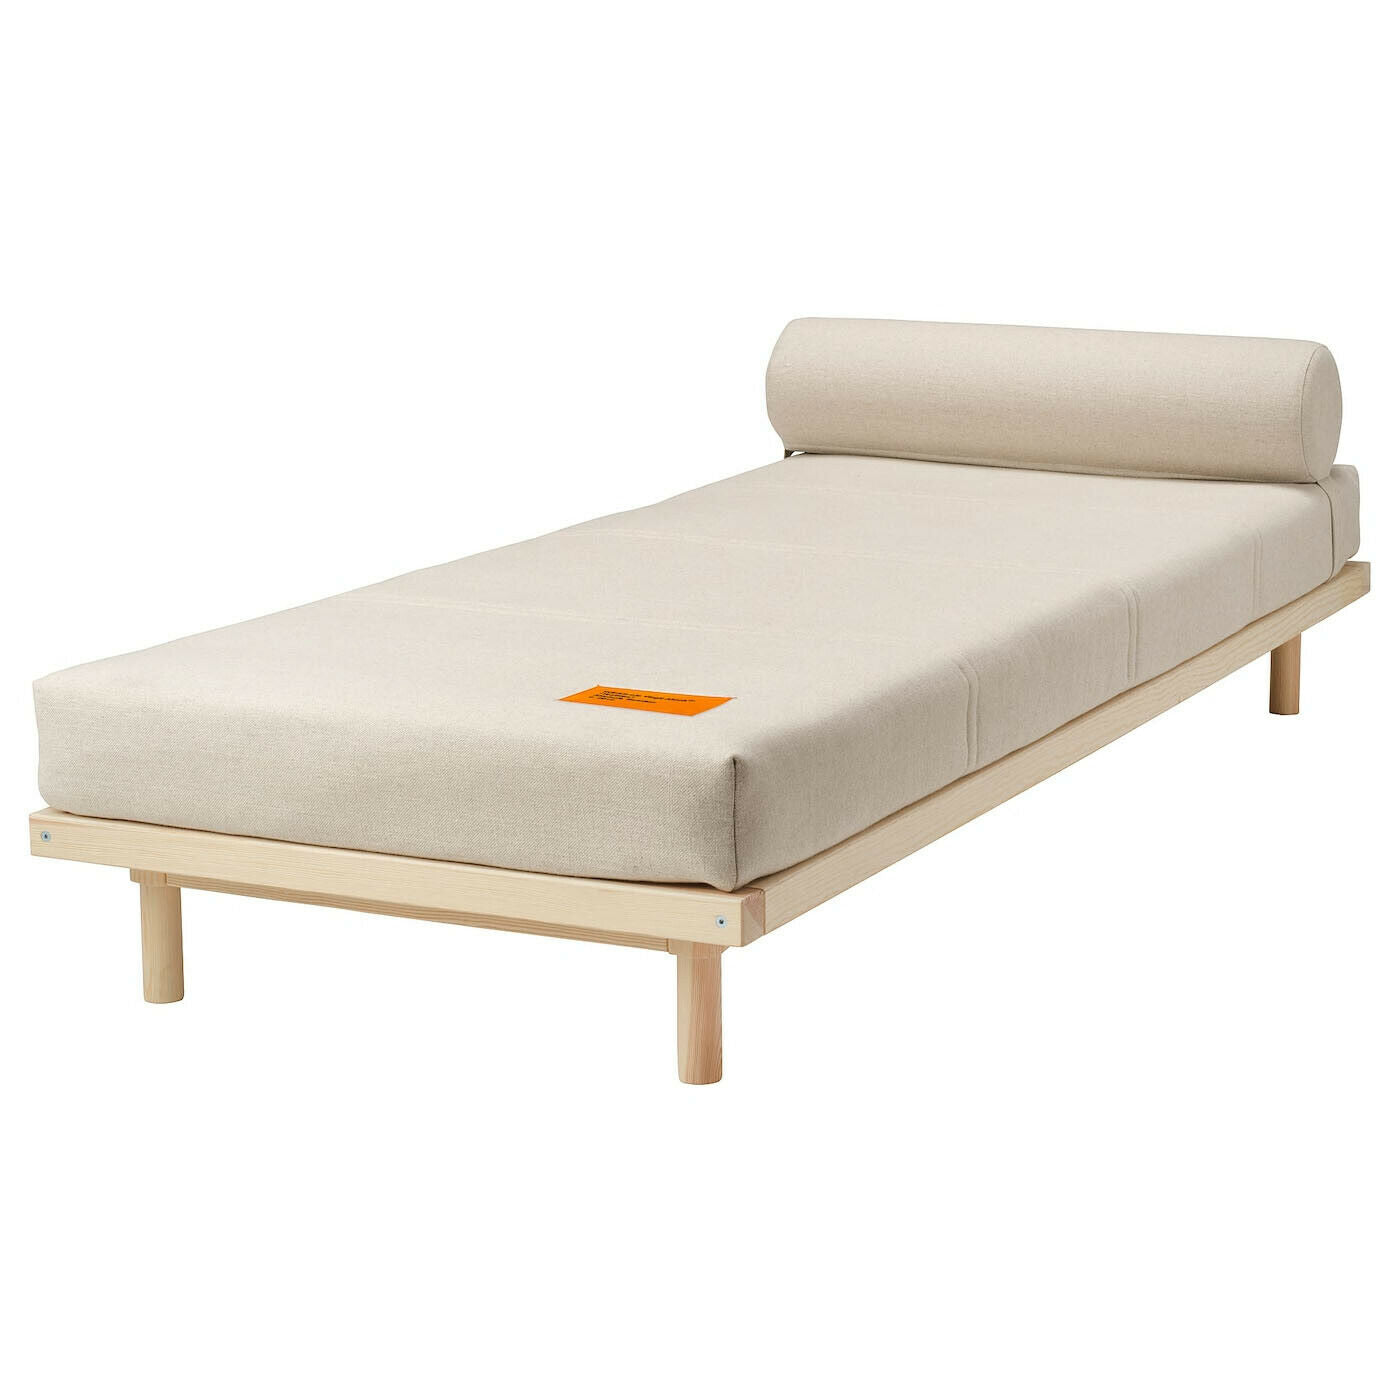 IKEA x Virgil Abloh MARKERAD Limited Edition Daybed Cover - Linen